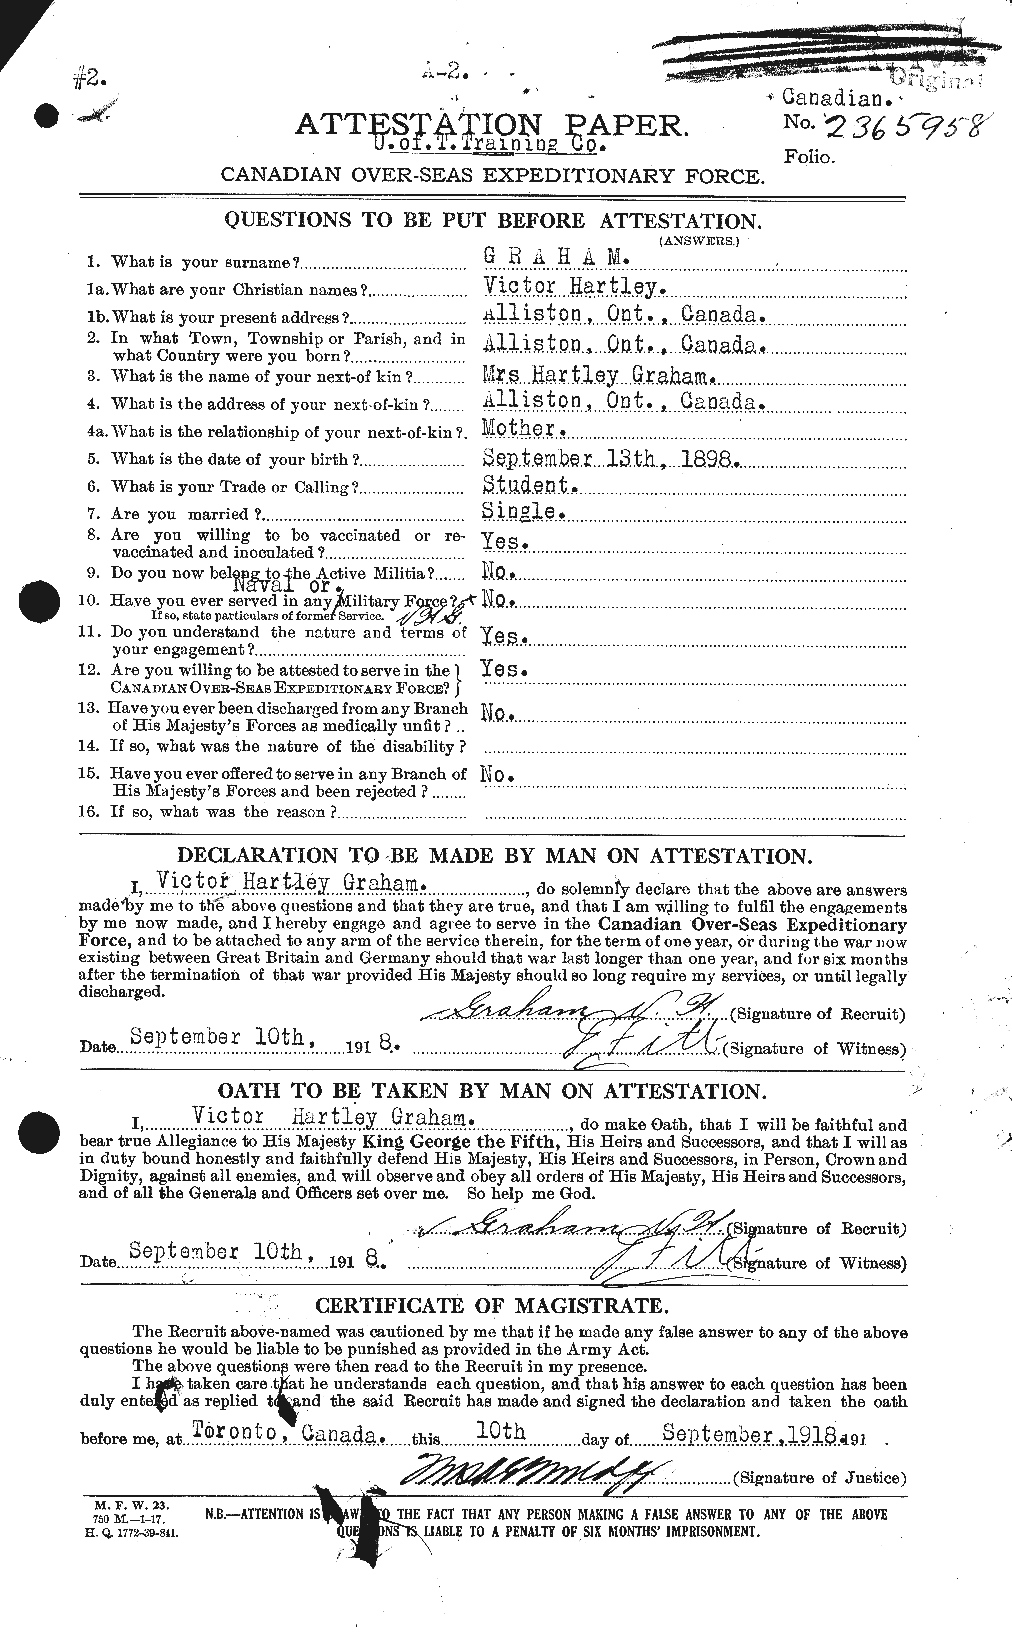 Personnel Records of the First World War - CEF 362646a